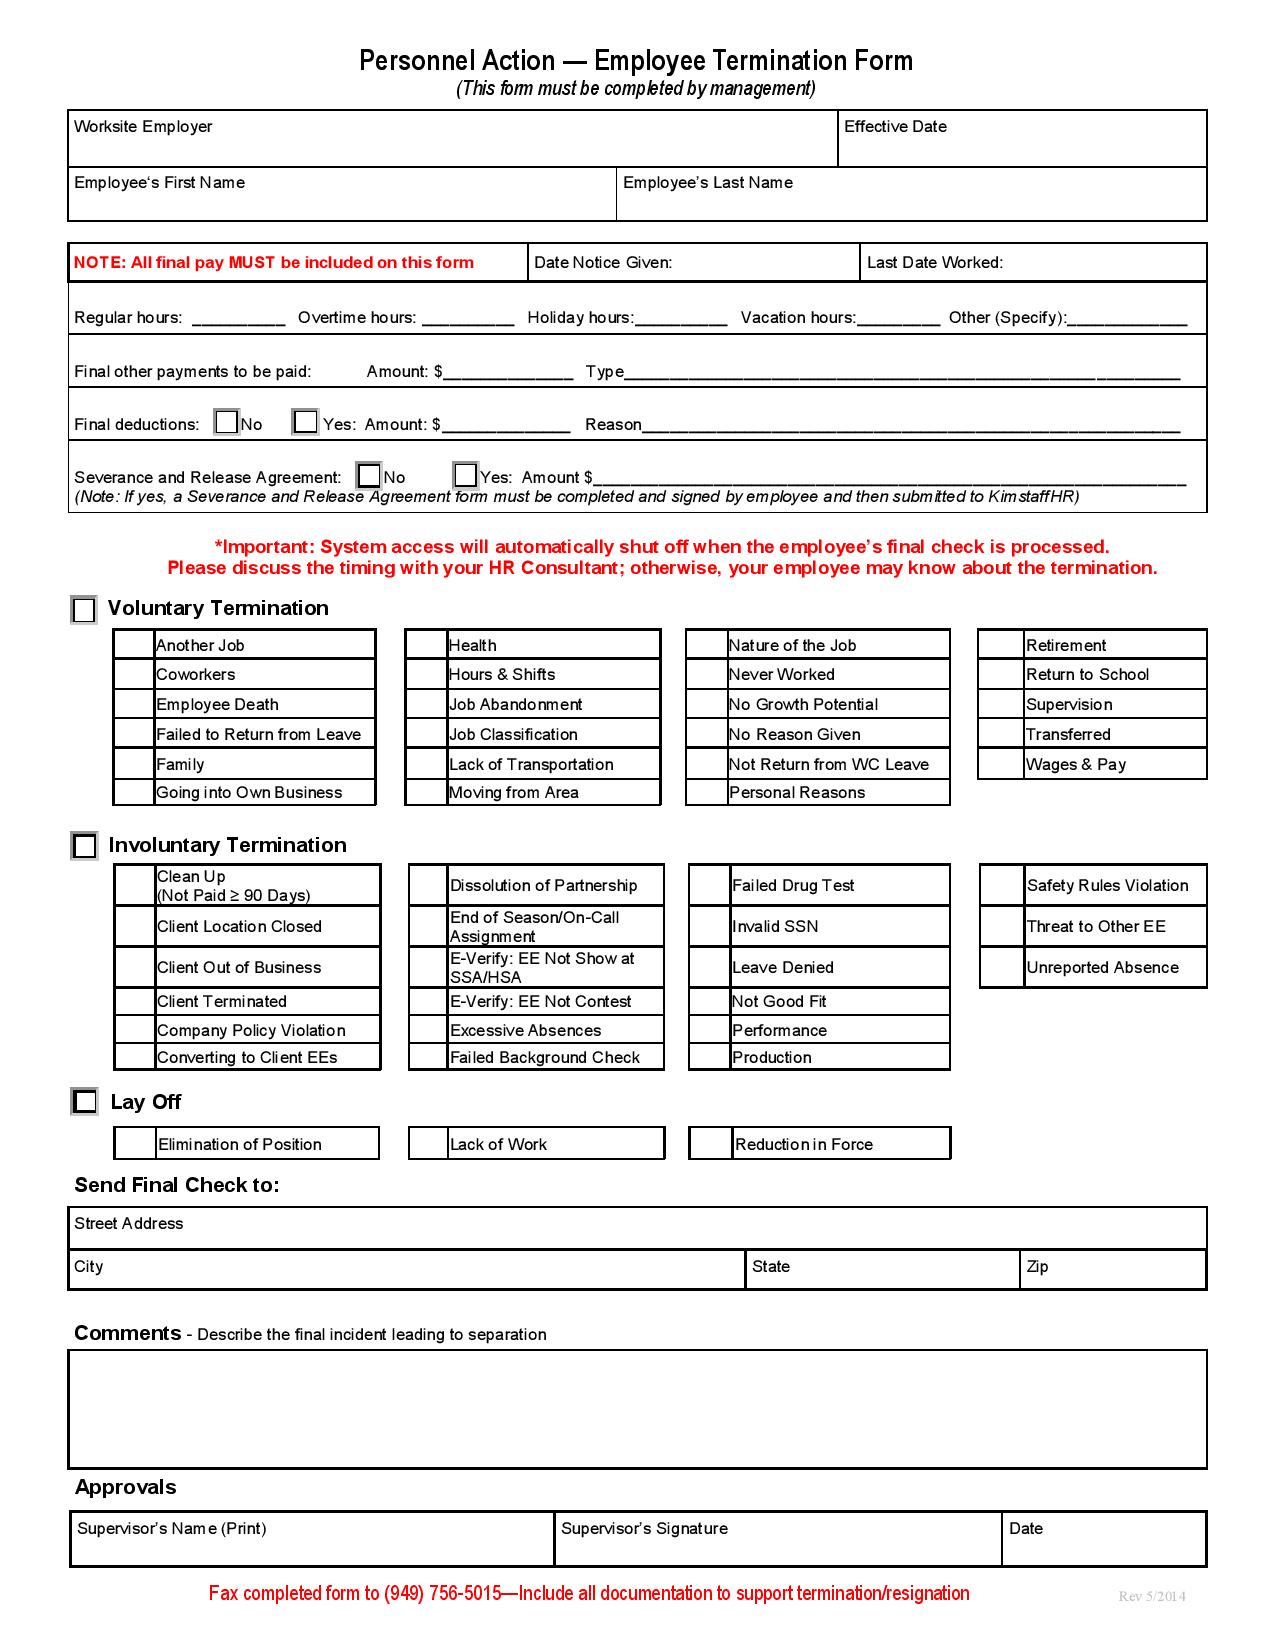 employee termination personnel action form page 001